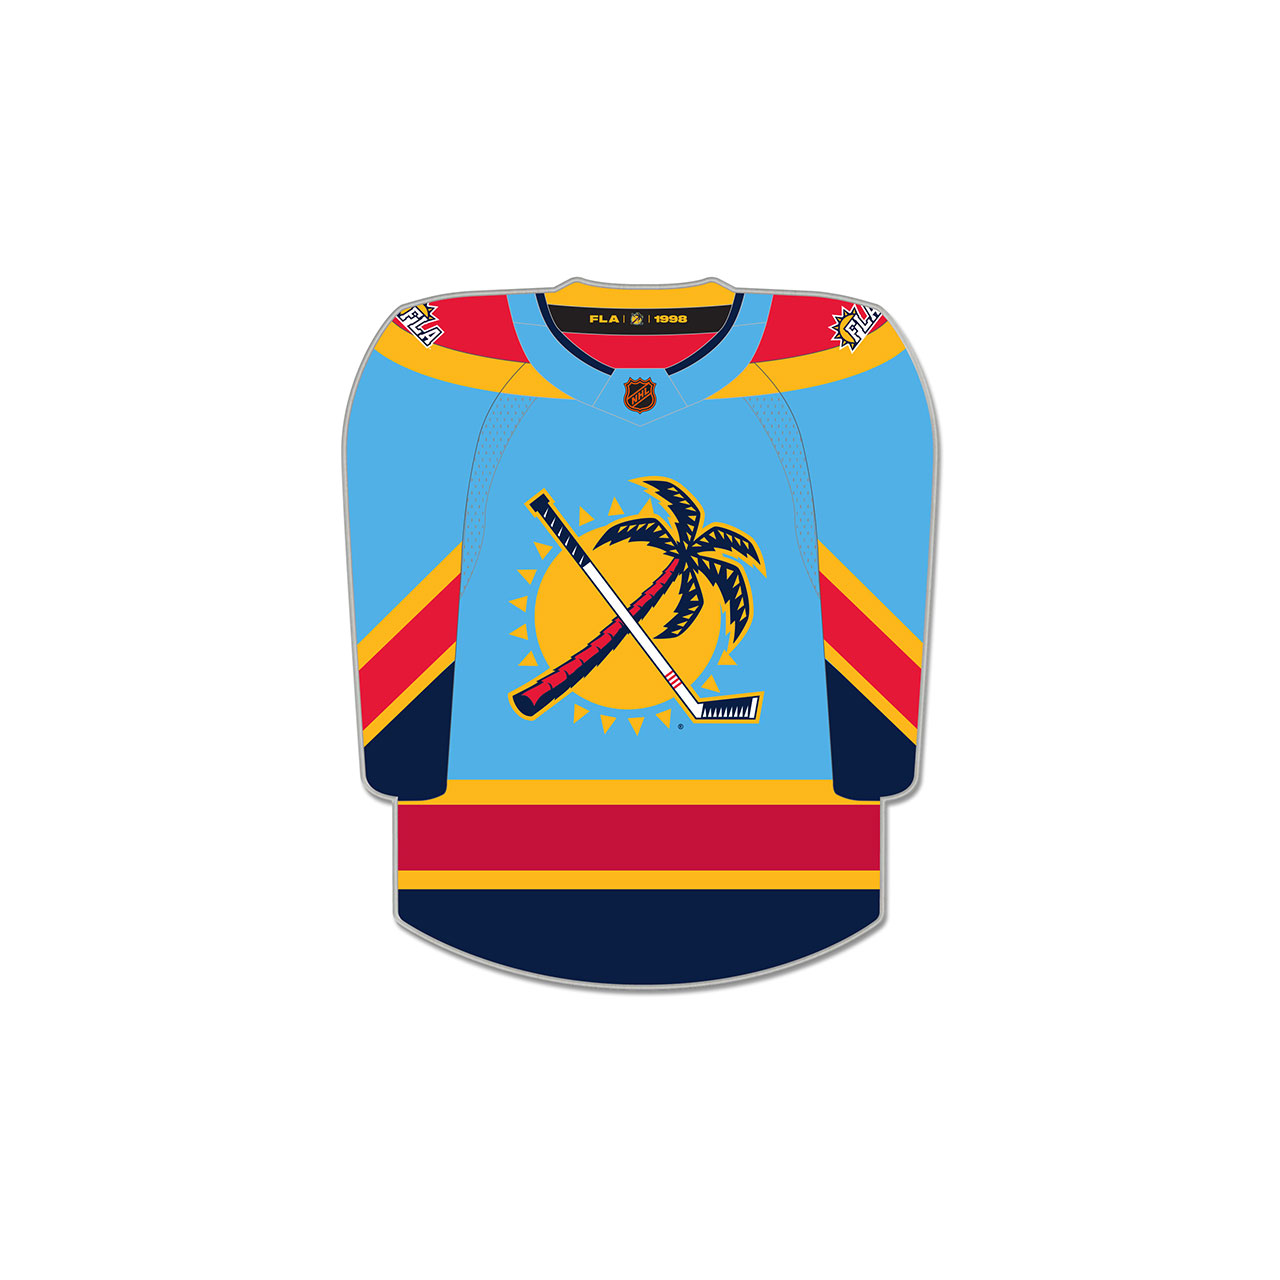 Florida Panthers Customized Number Kit For 2022 Reverse Retro